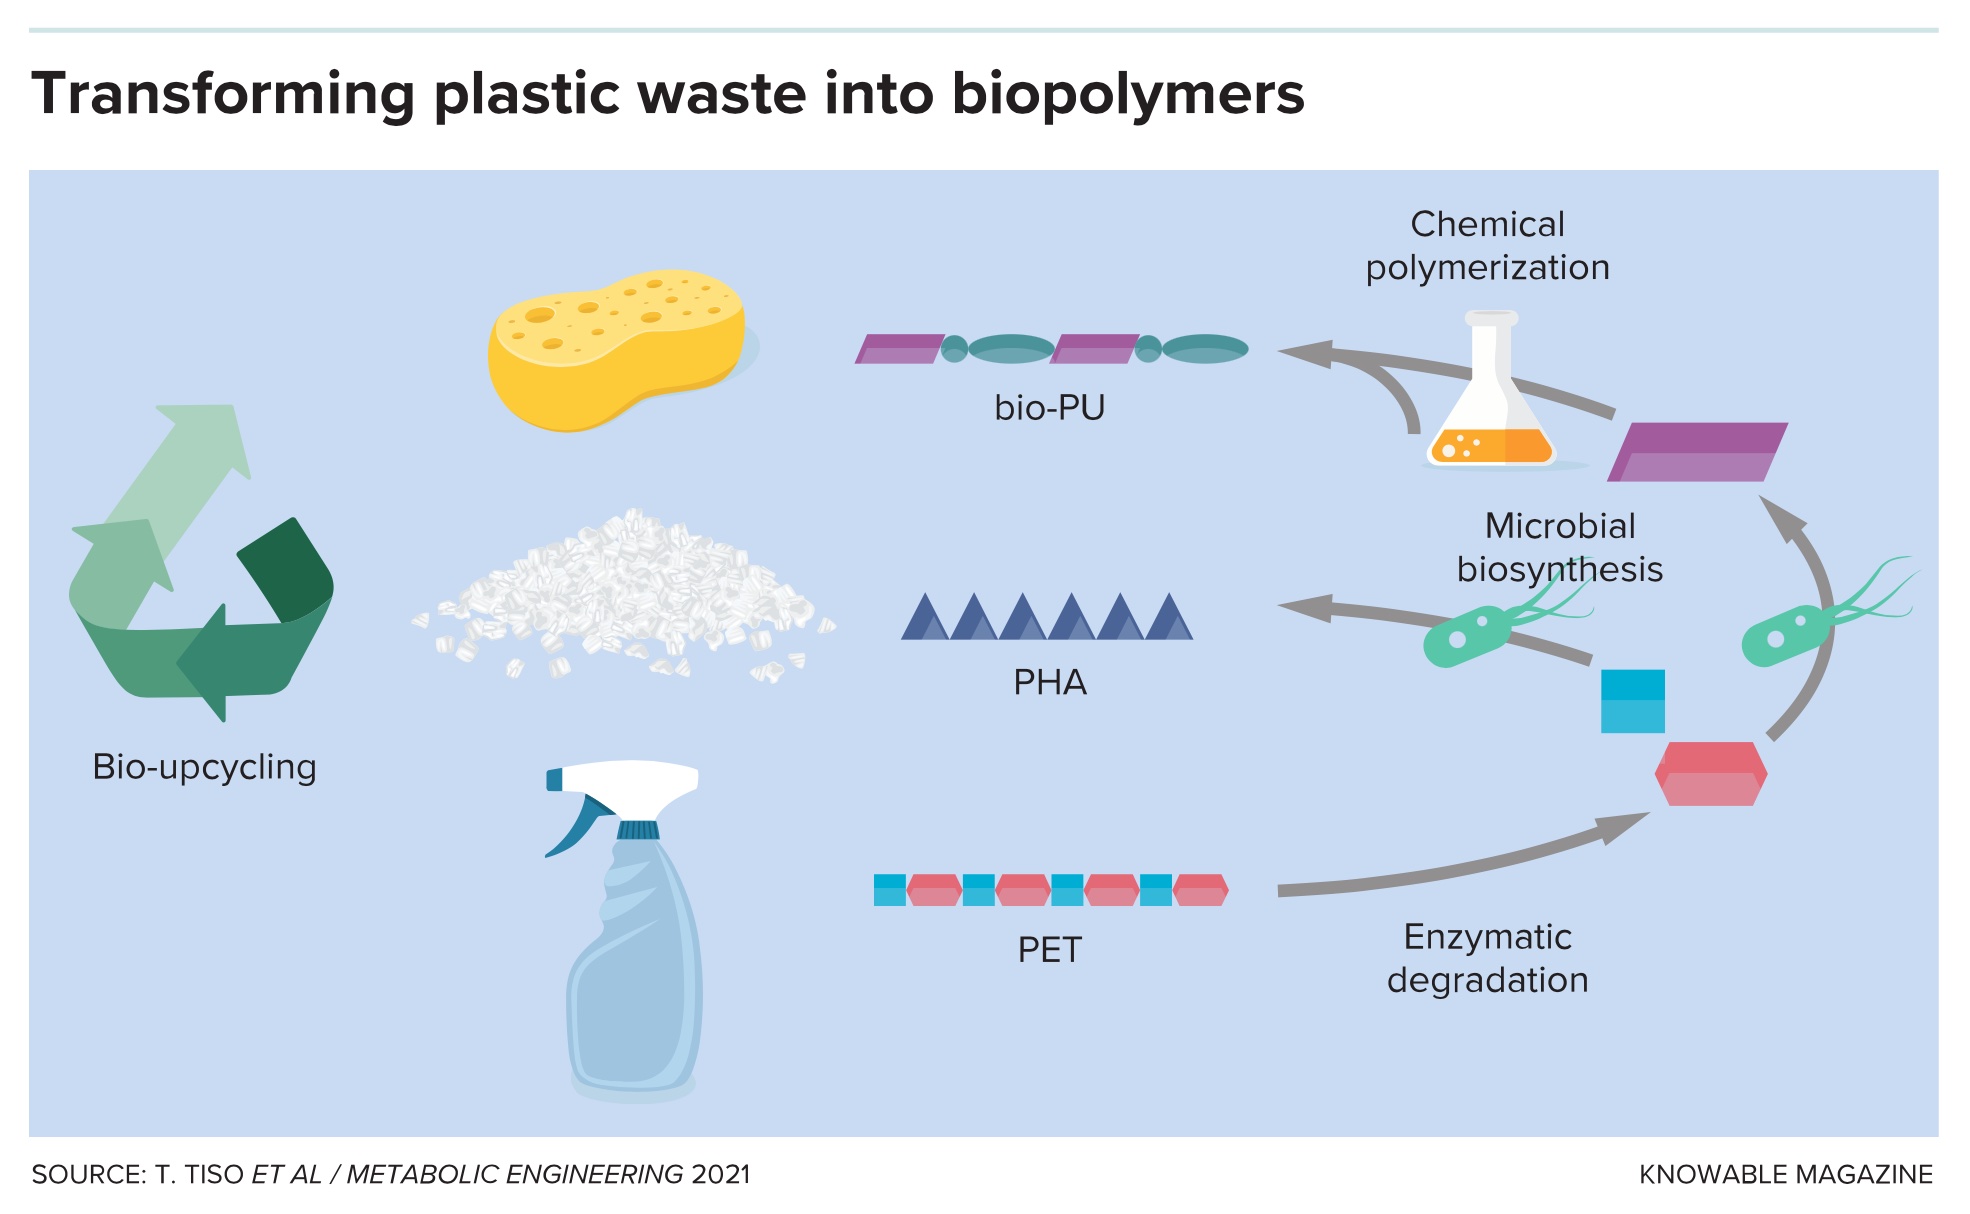 Recycling plastic waste by transforming it into biopolymers.